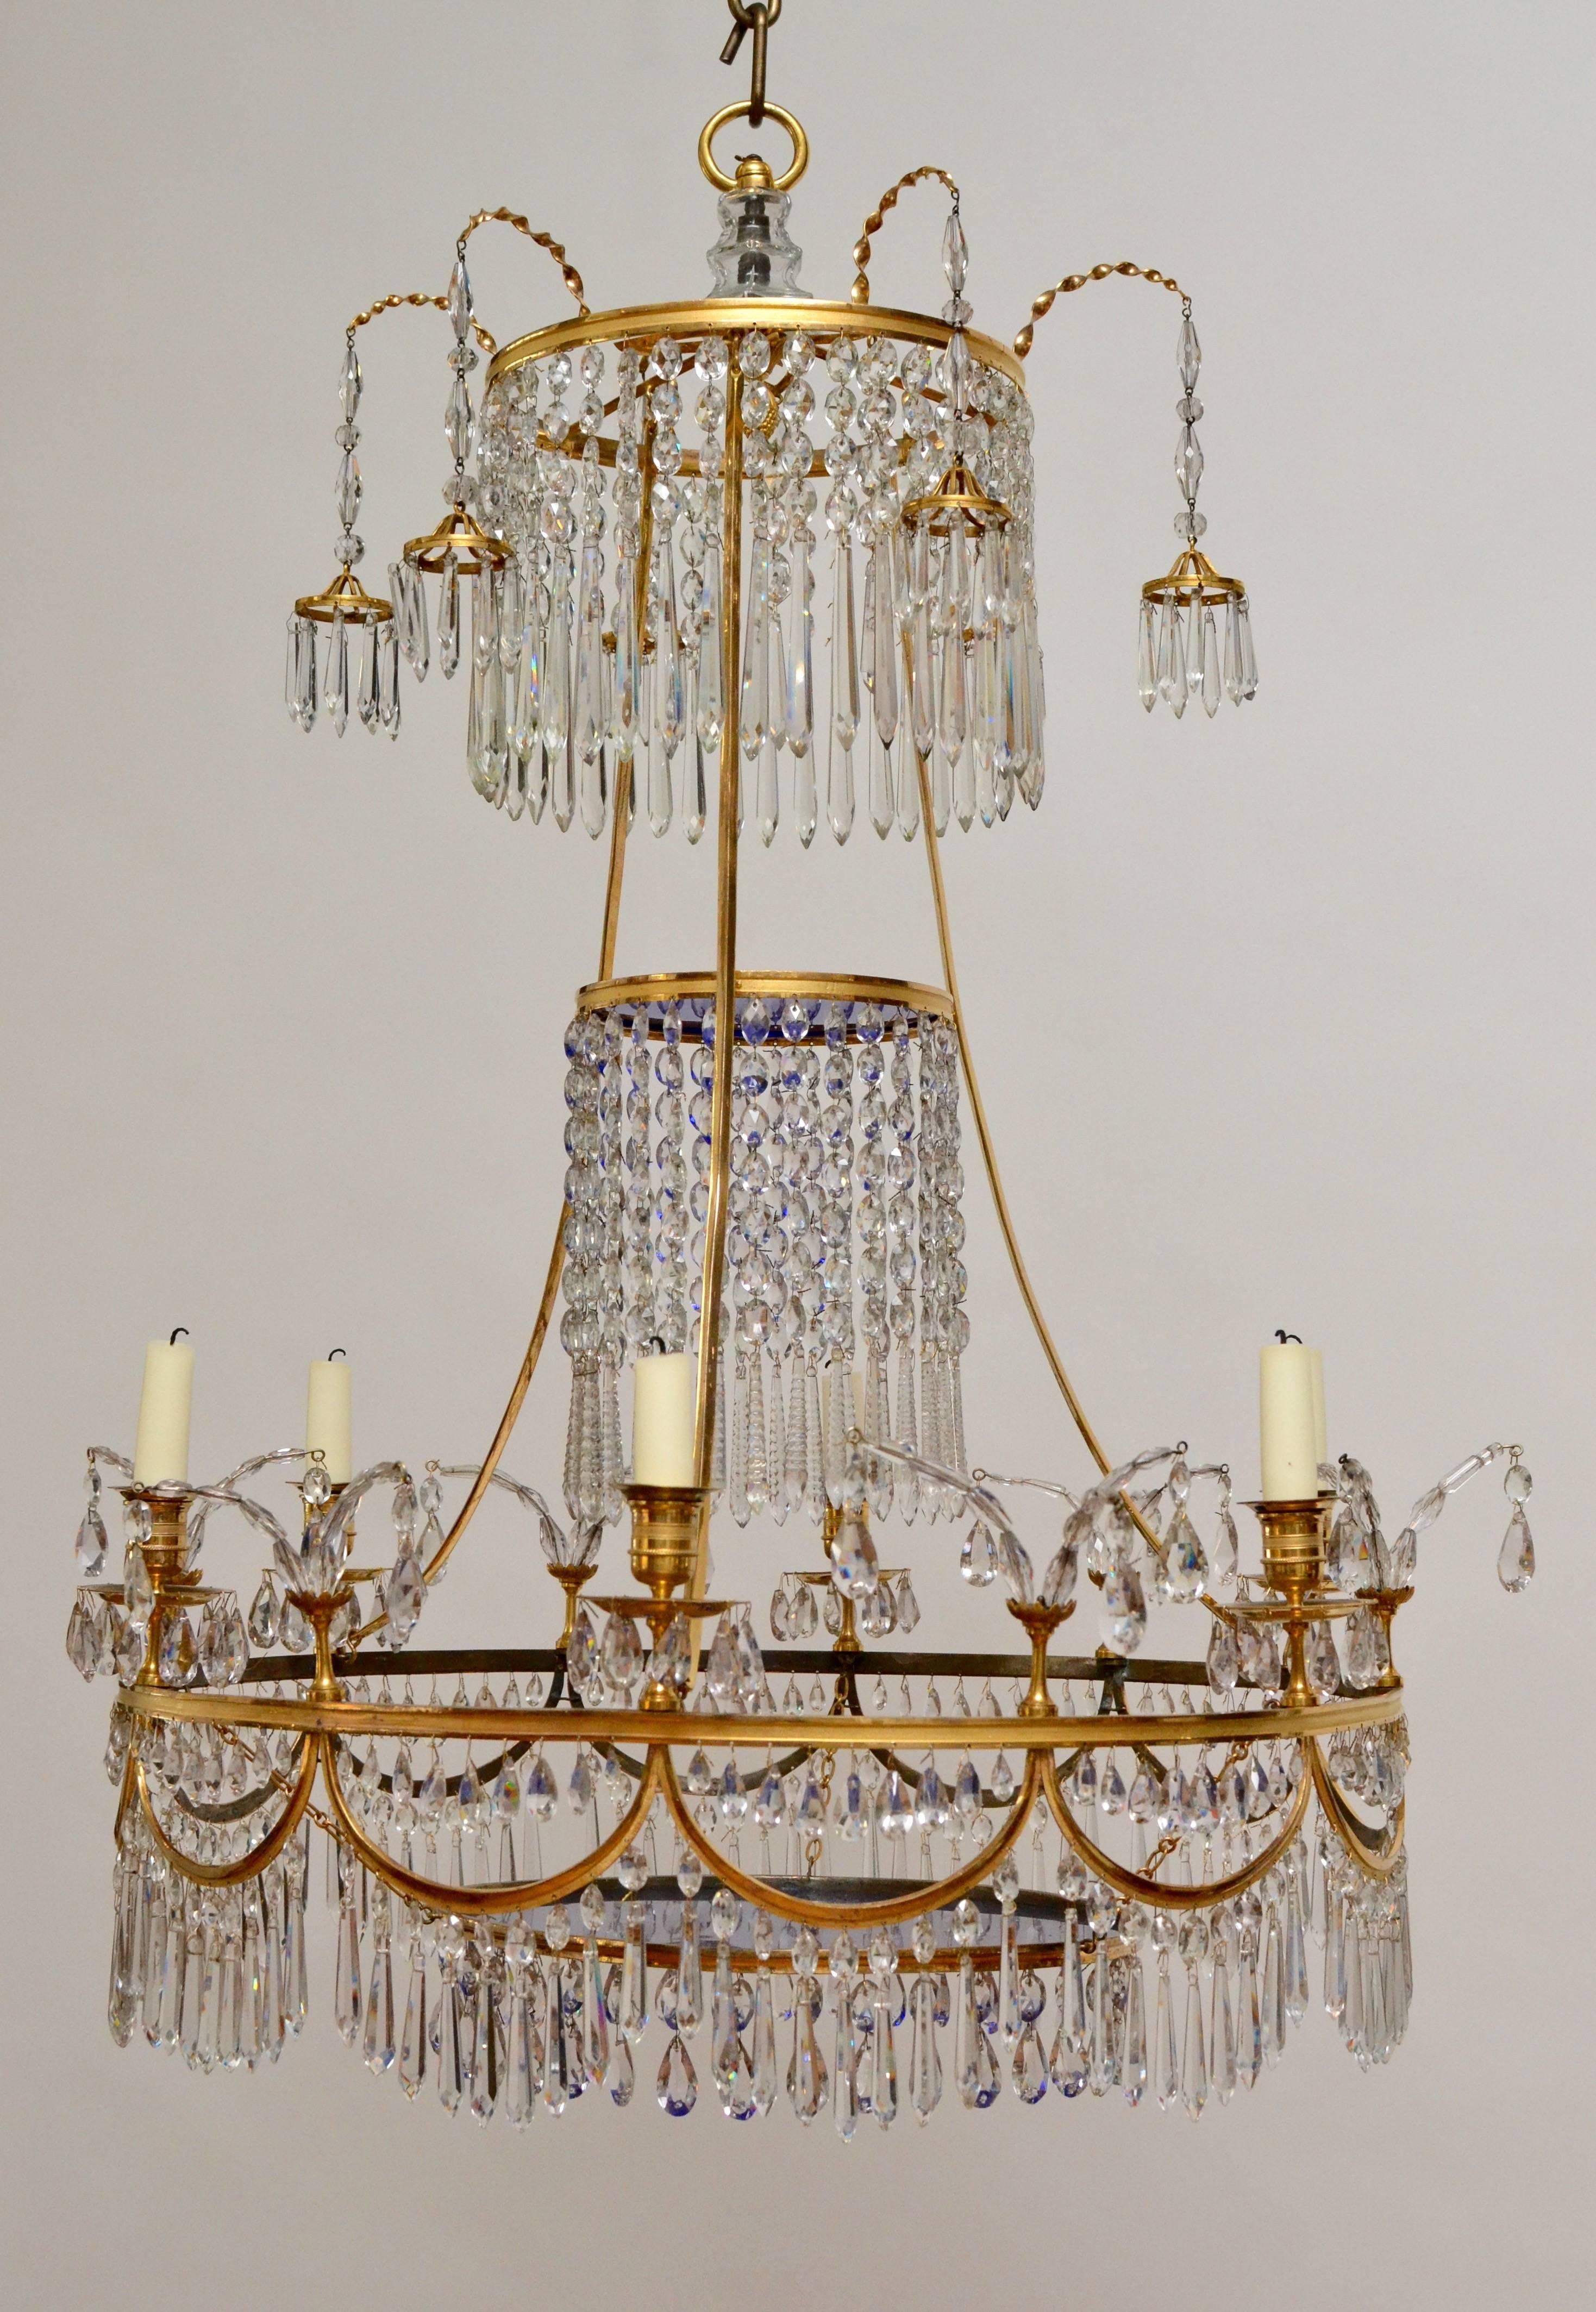 A German gilt bronze Louis XVI chandelier attributed to Werner & Mieth, late 18th century. Blue glass at the top and in the bottom.